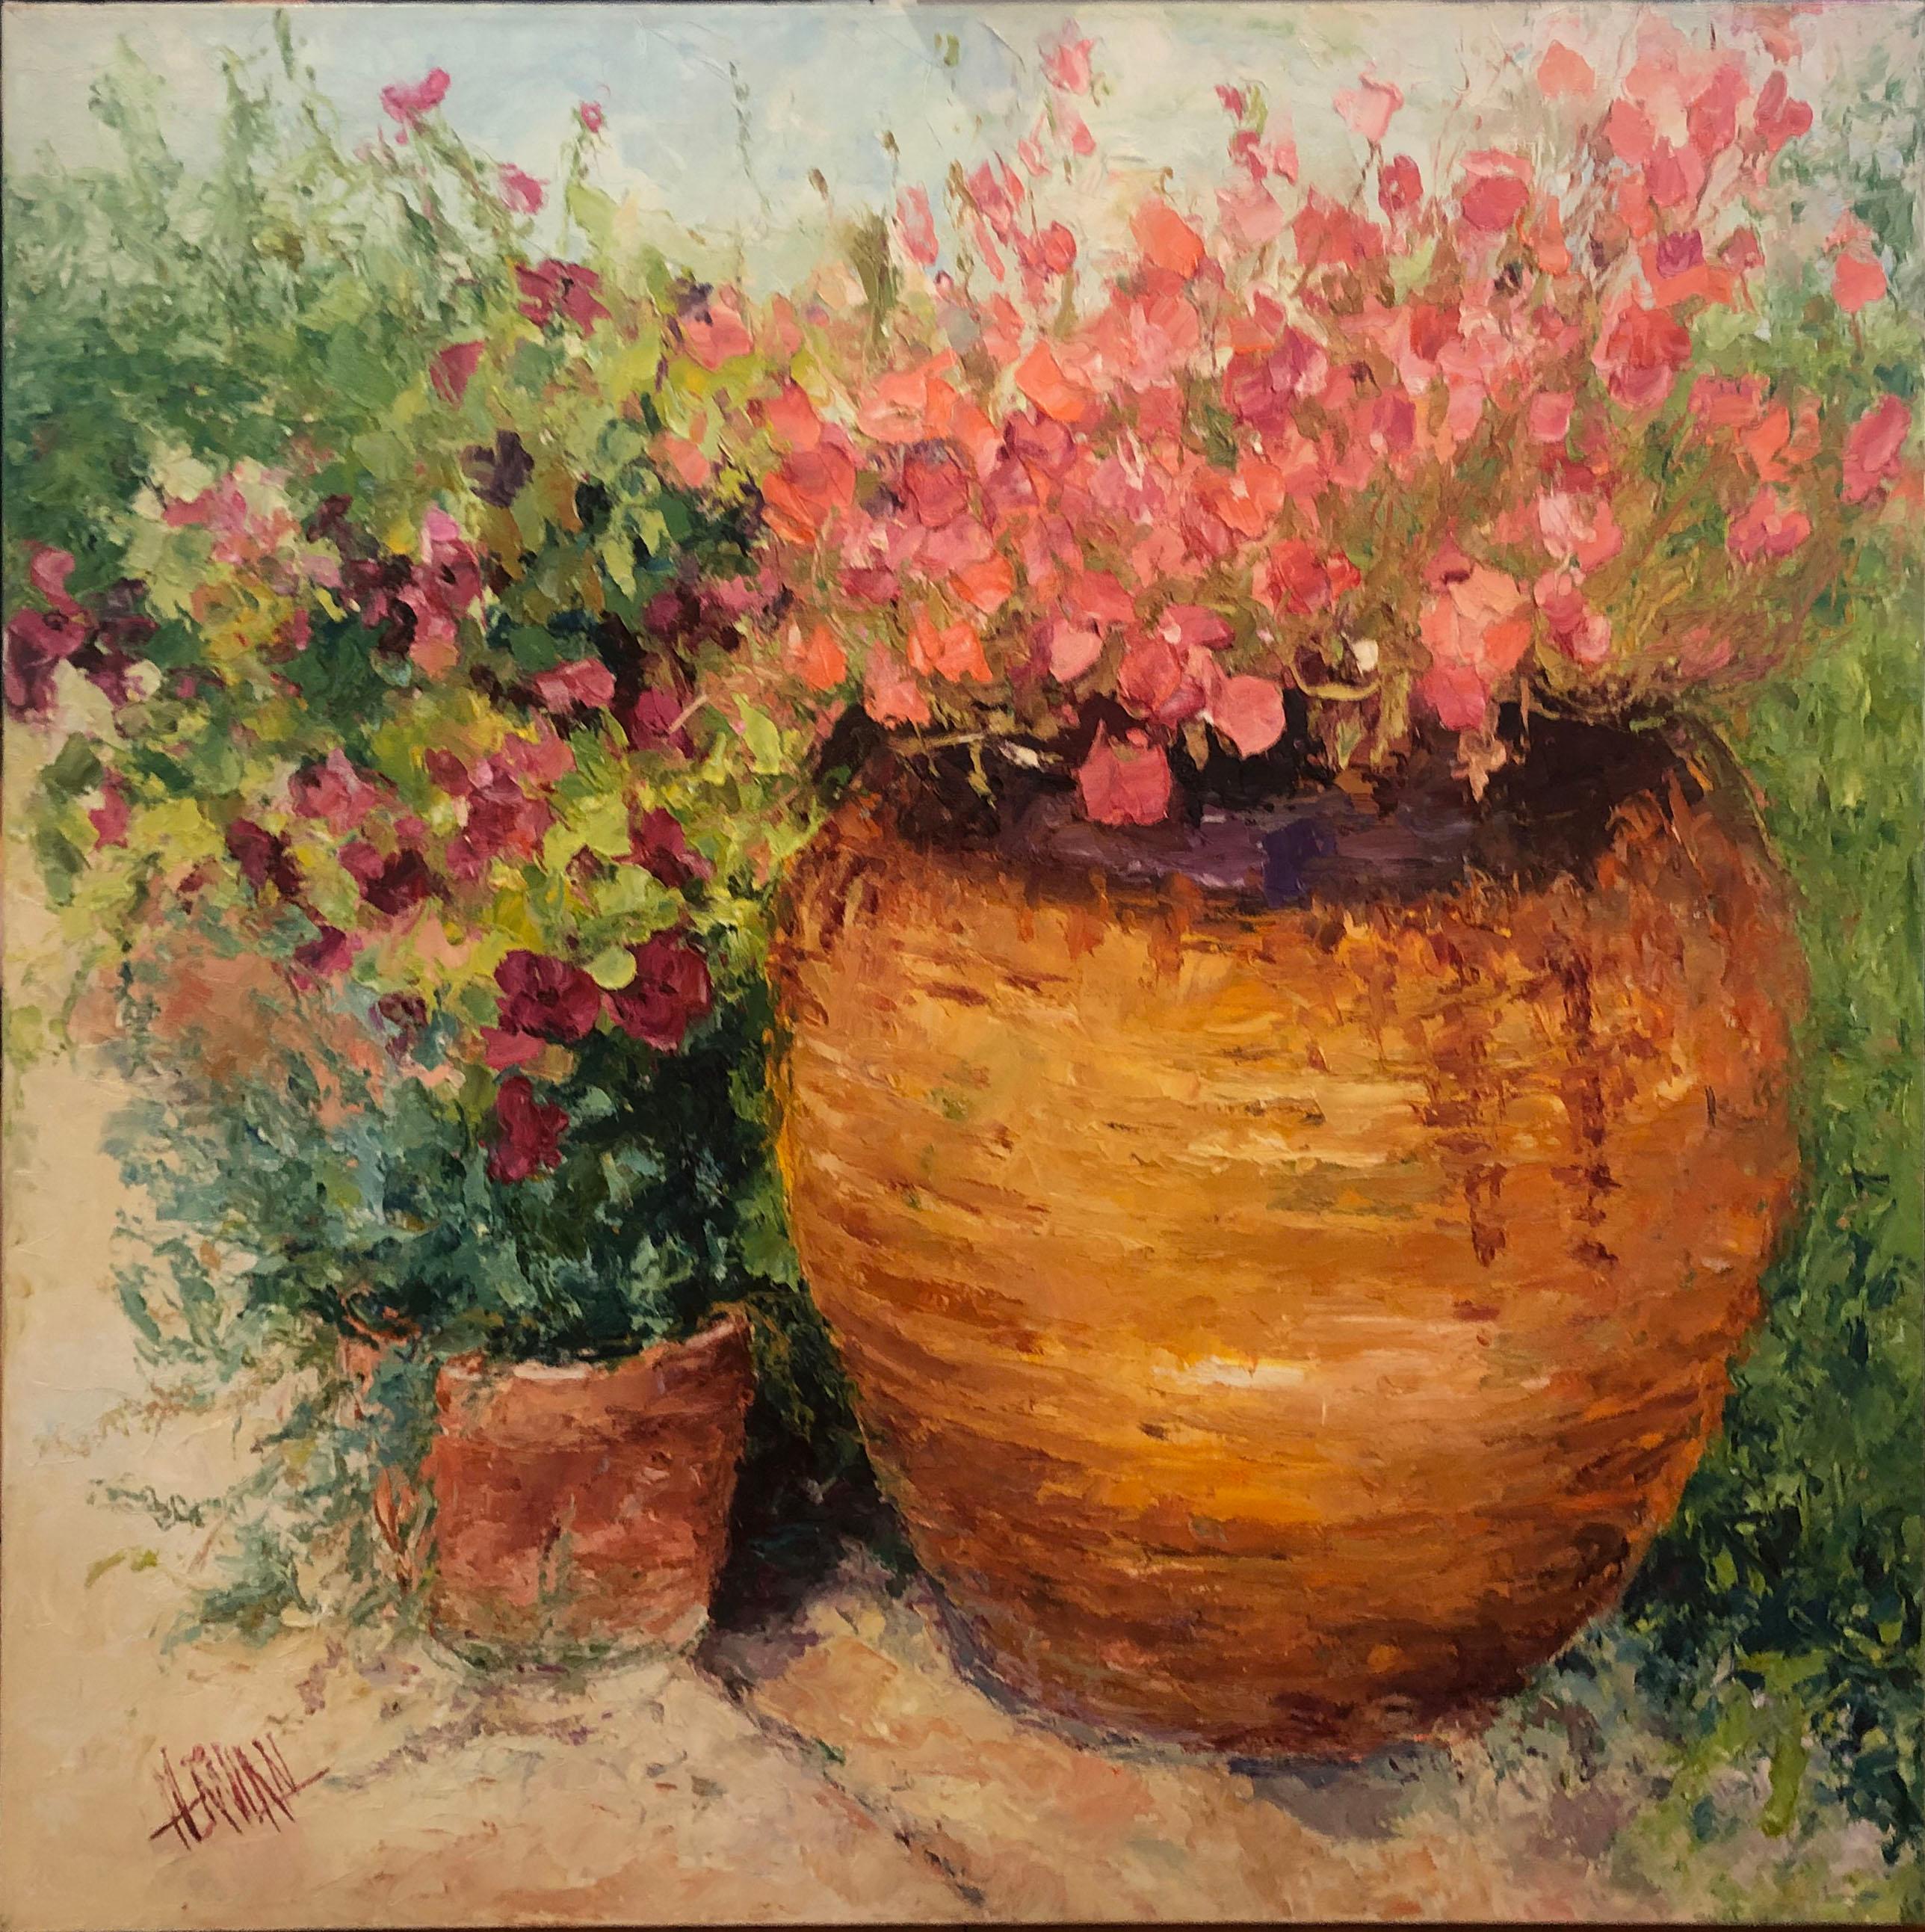 Henrietta Milan, "Sophie's Domain", 36x36 Pink Potted Flower Oil Painting 